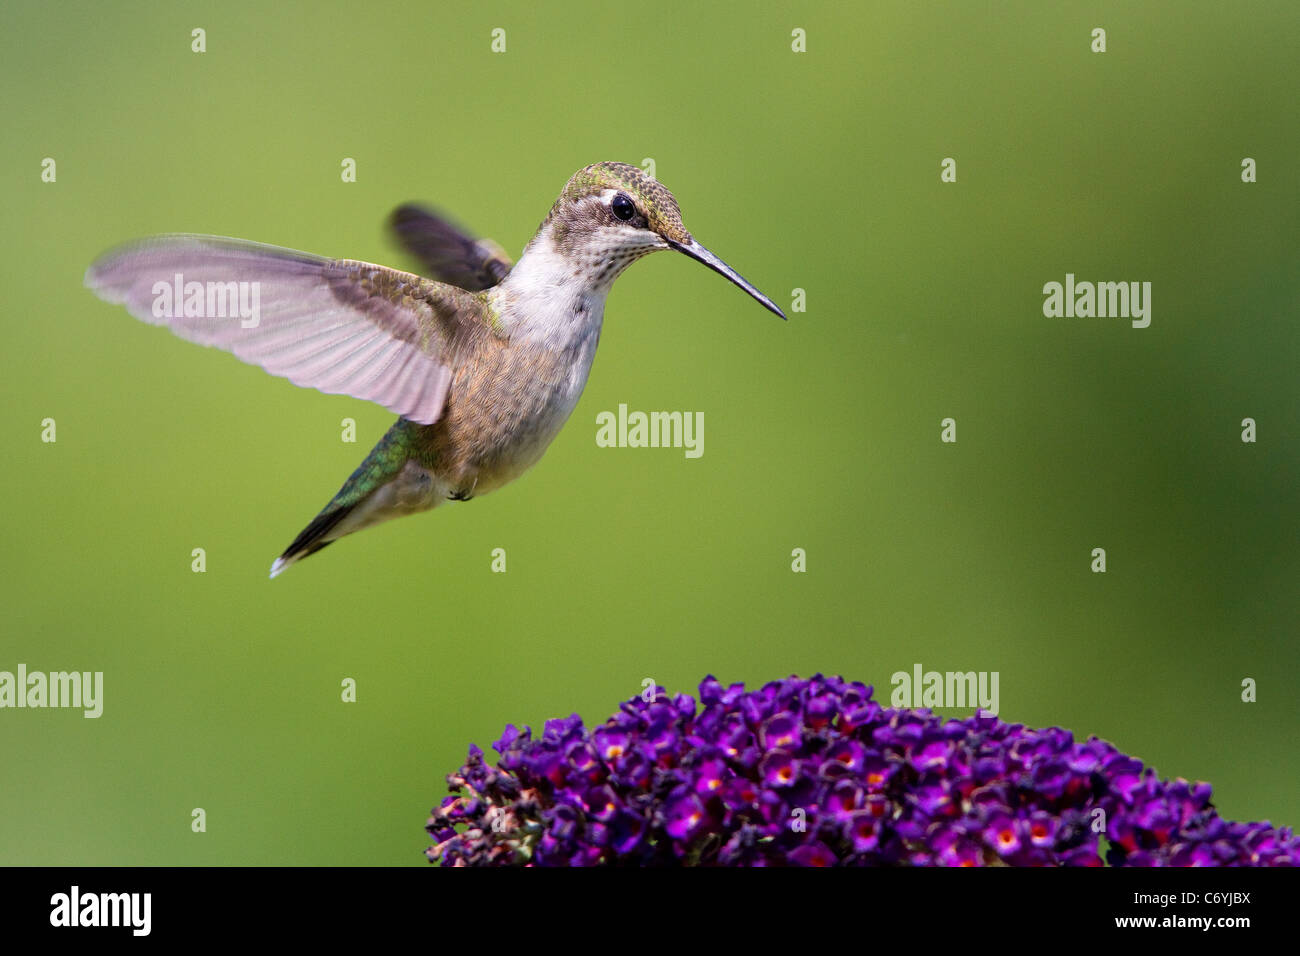 Hummingbird, Ruby throated hummingbird, ruby throated humming bird female, Archilochus colubris, hovers above a flower. Stock Photo